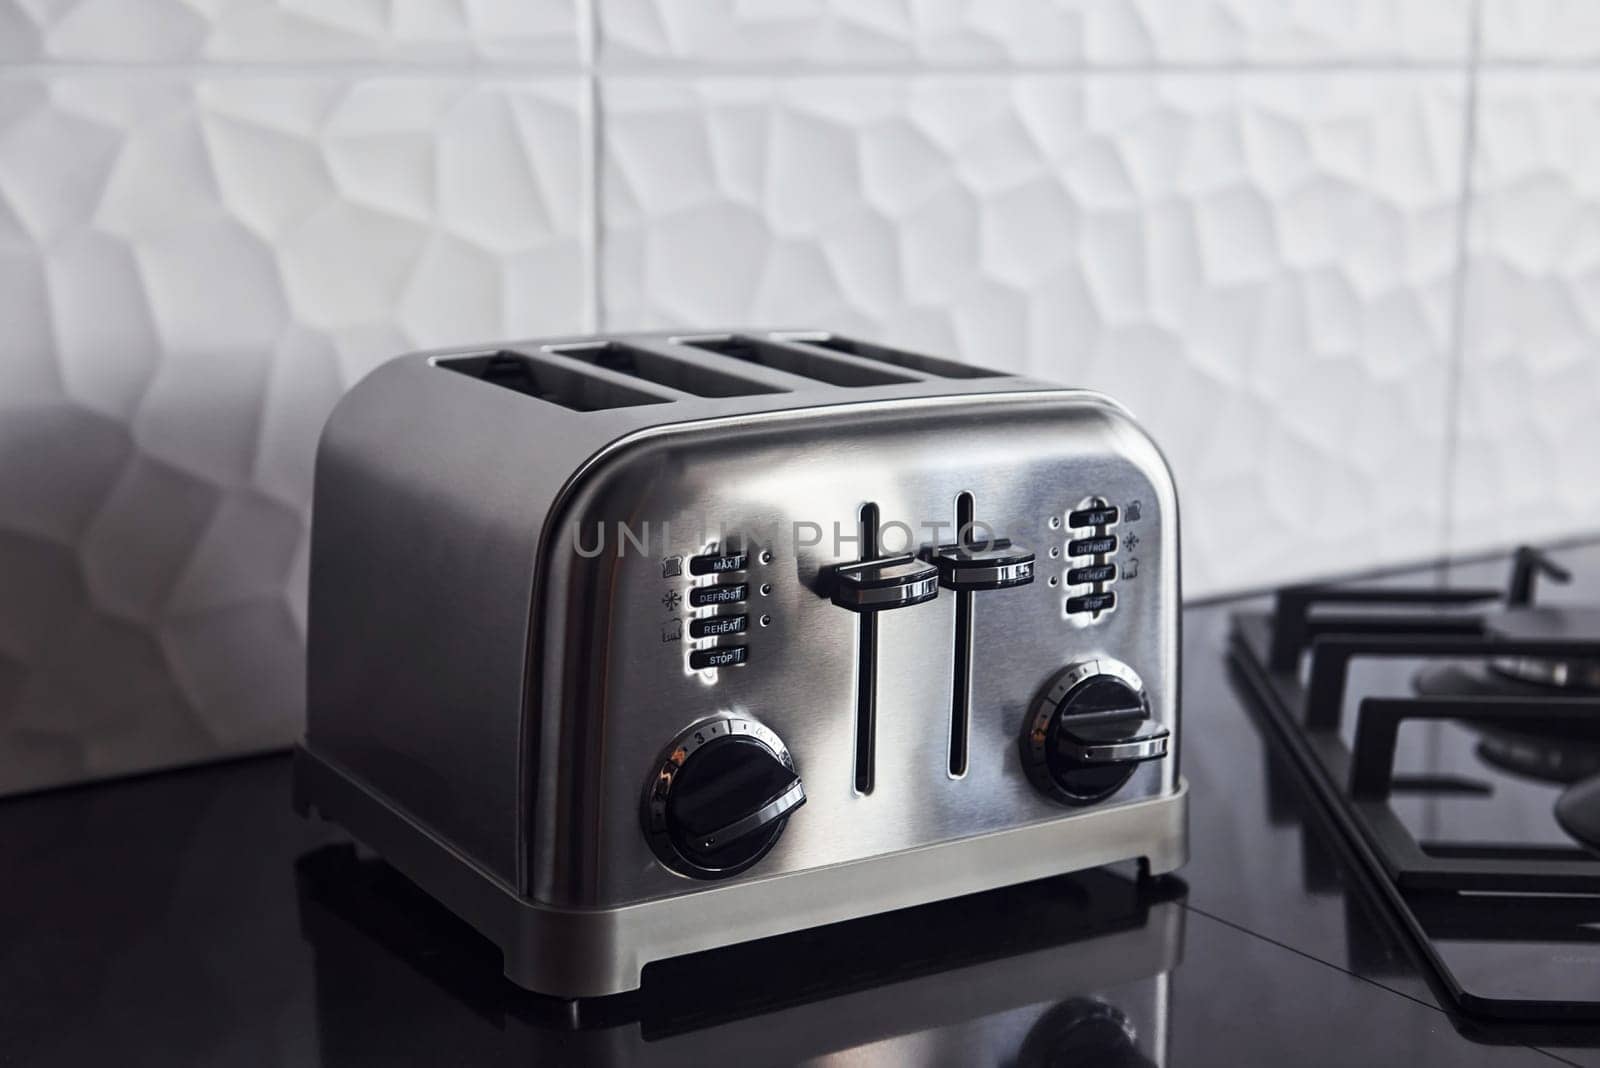 Close up view of silver colored toaster that standing on gas stove indoors in kitchen.